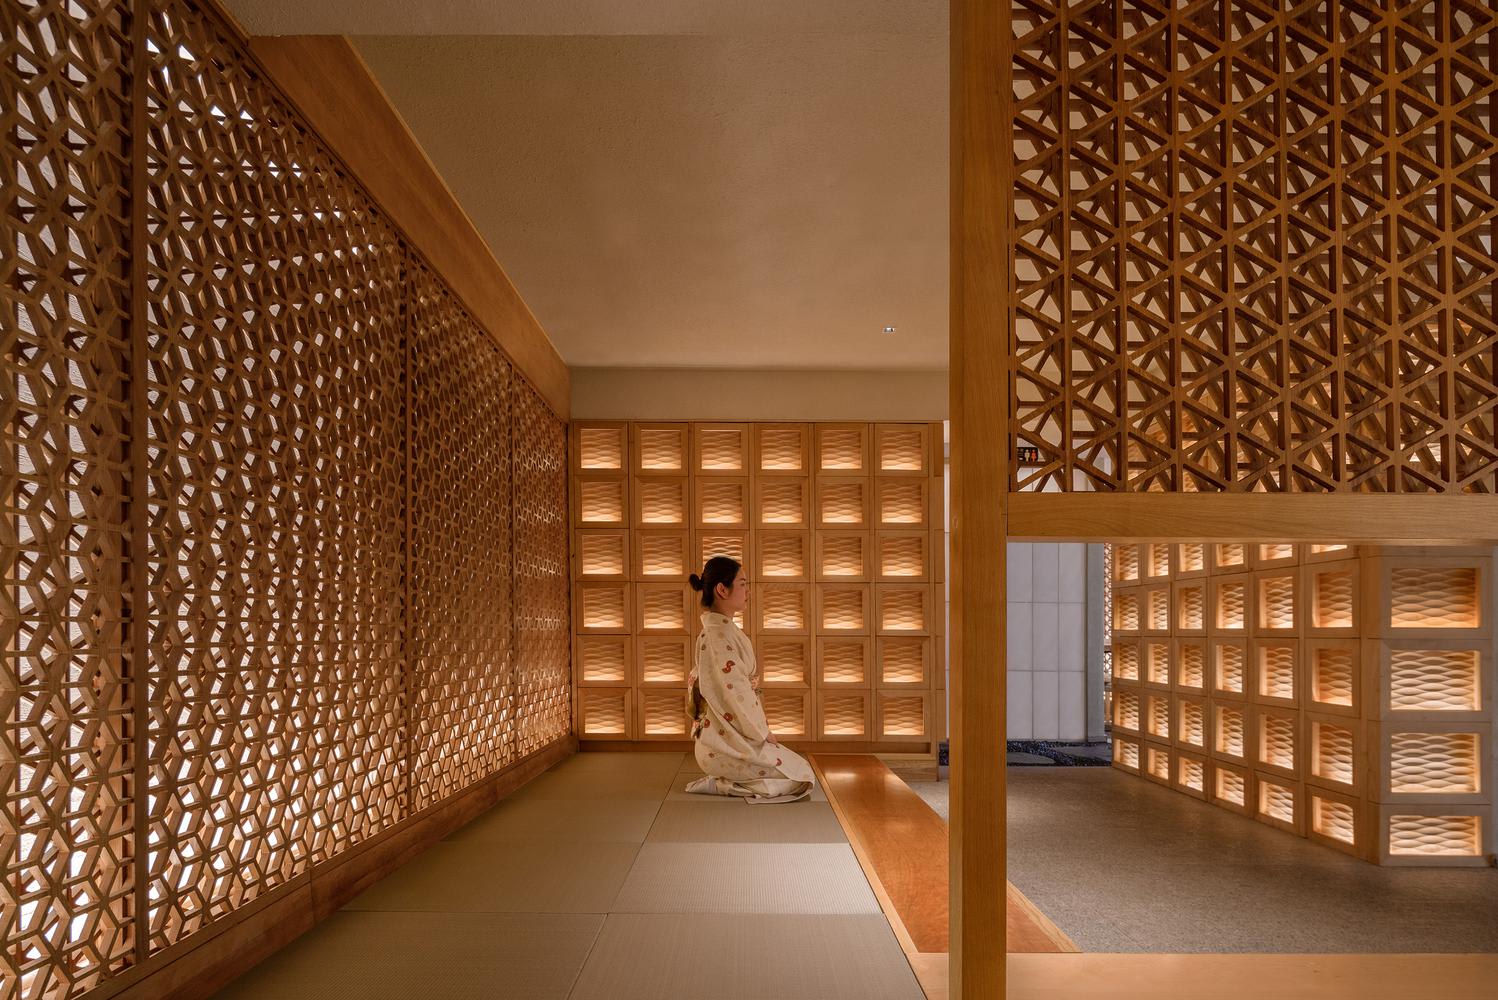 Ryōtei Restaurant Meditation Space with Asanoha Patterned Walls